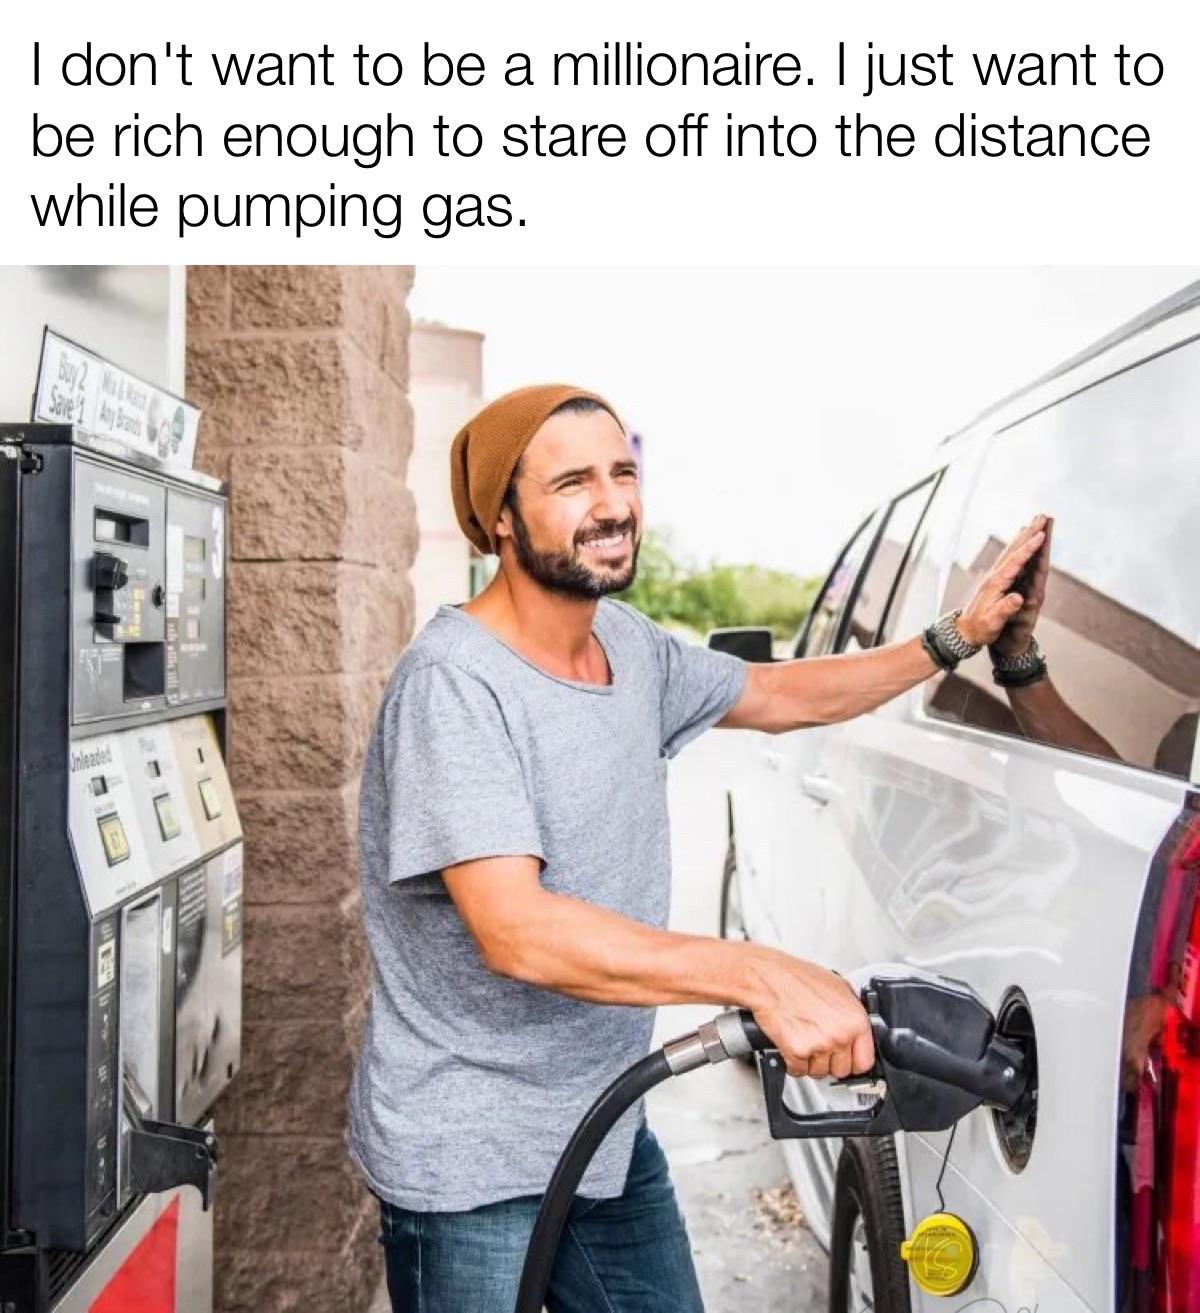 funny memes and pics - I don't want to be a millionaire. I just want to be rich enough to stare off into the distance while pumping gas. Buy 2 M Save 1 Ay Brand Unleaded